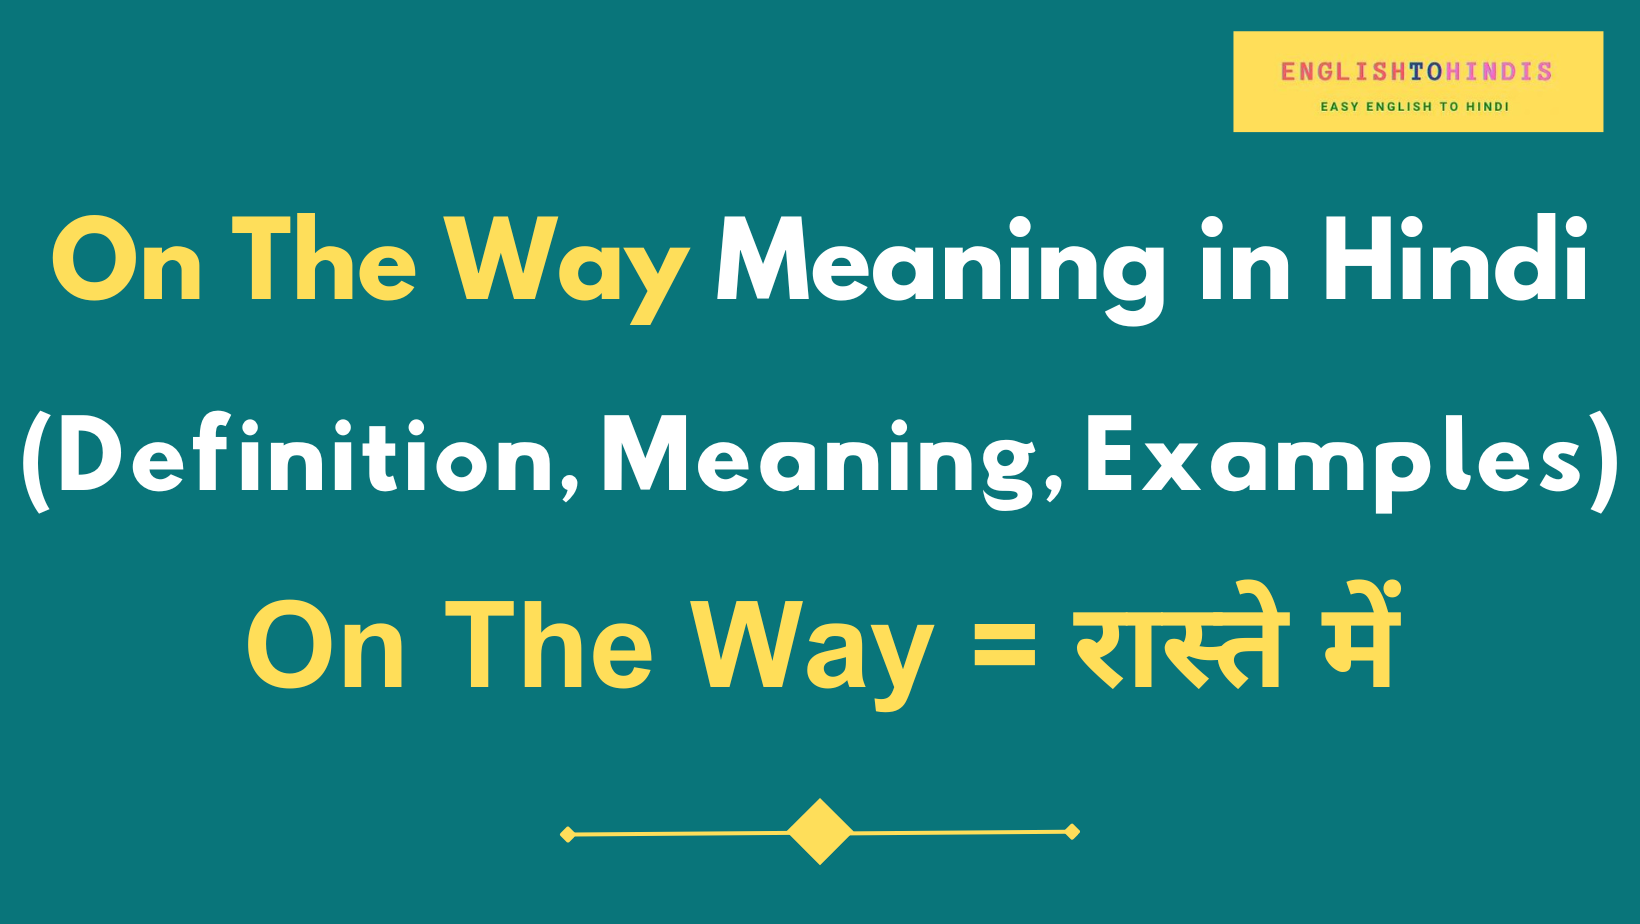 On The Way Meaning in Hindi